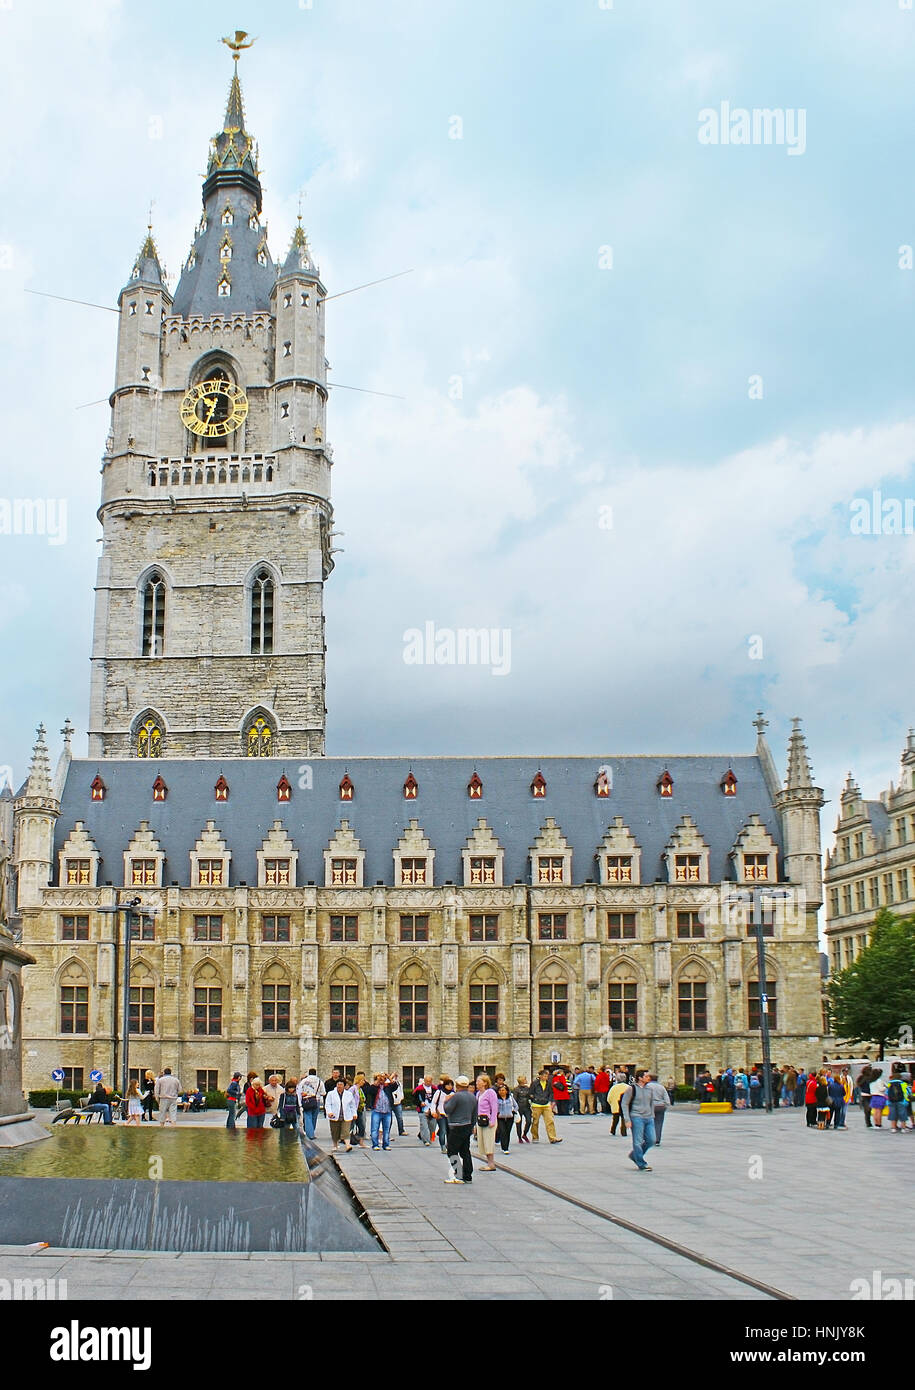 GHENT, BELGIUM - MAY 26, 2011: The historic building of the Belfort van Gent (Belfry), located at the Sint-Baafsplein Square, on May 26 in Ghent. Stock Photo